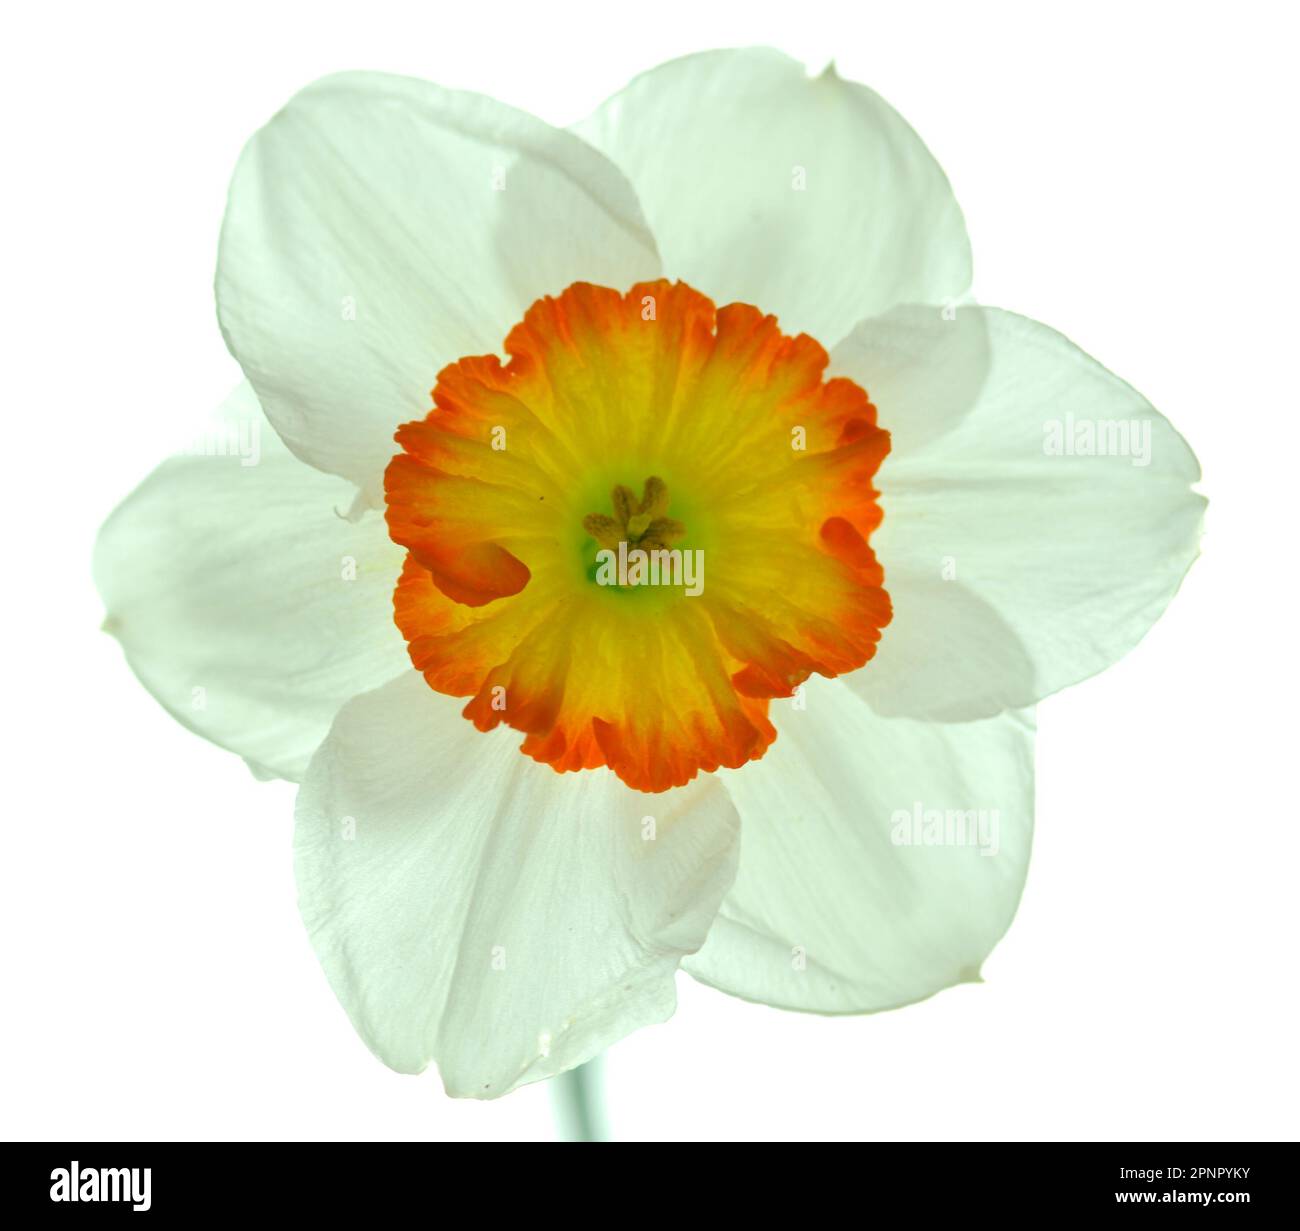 Single white daffodil with a yellow orange center backlit on a white background making petals translucent. Stock Photo